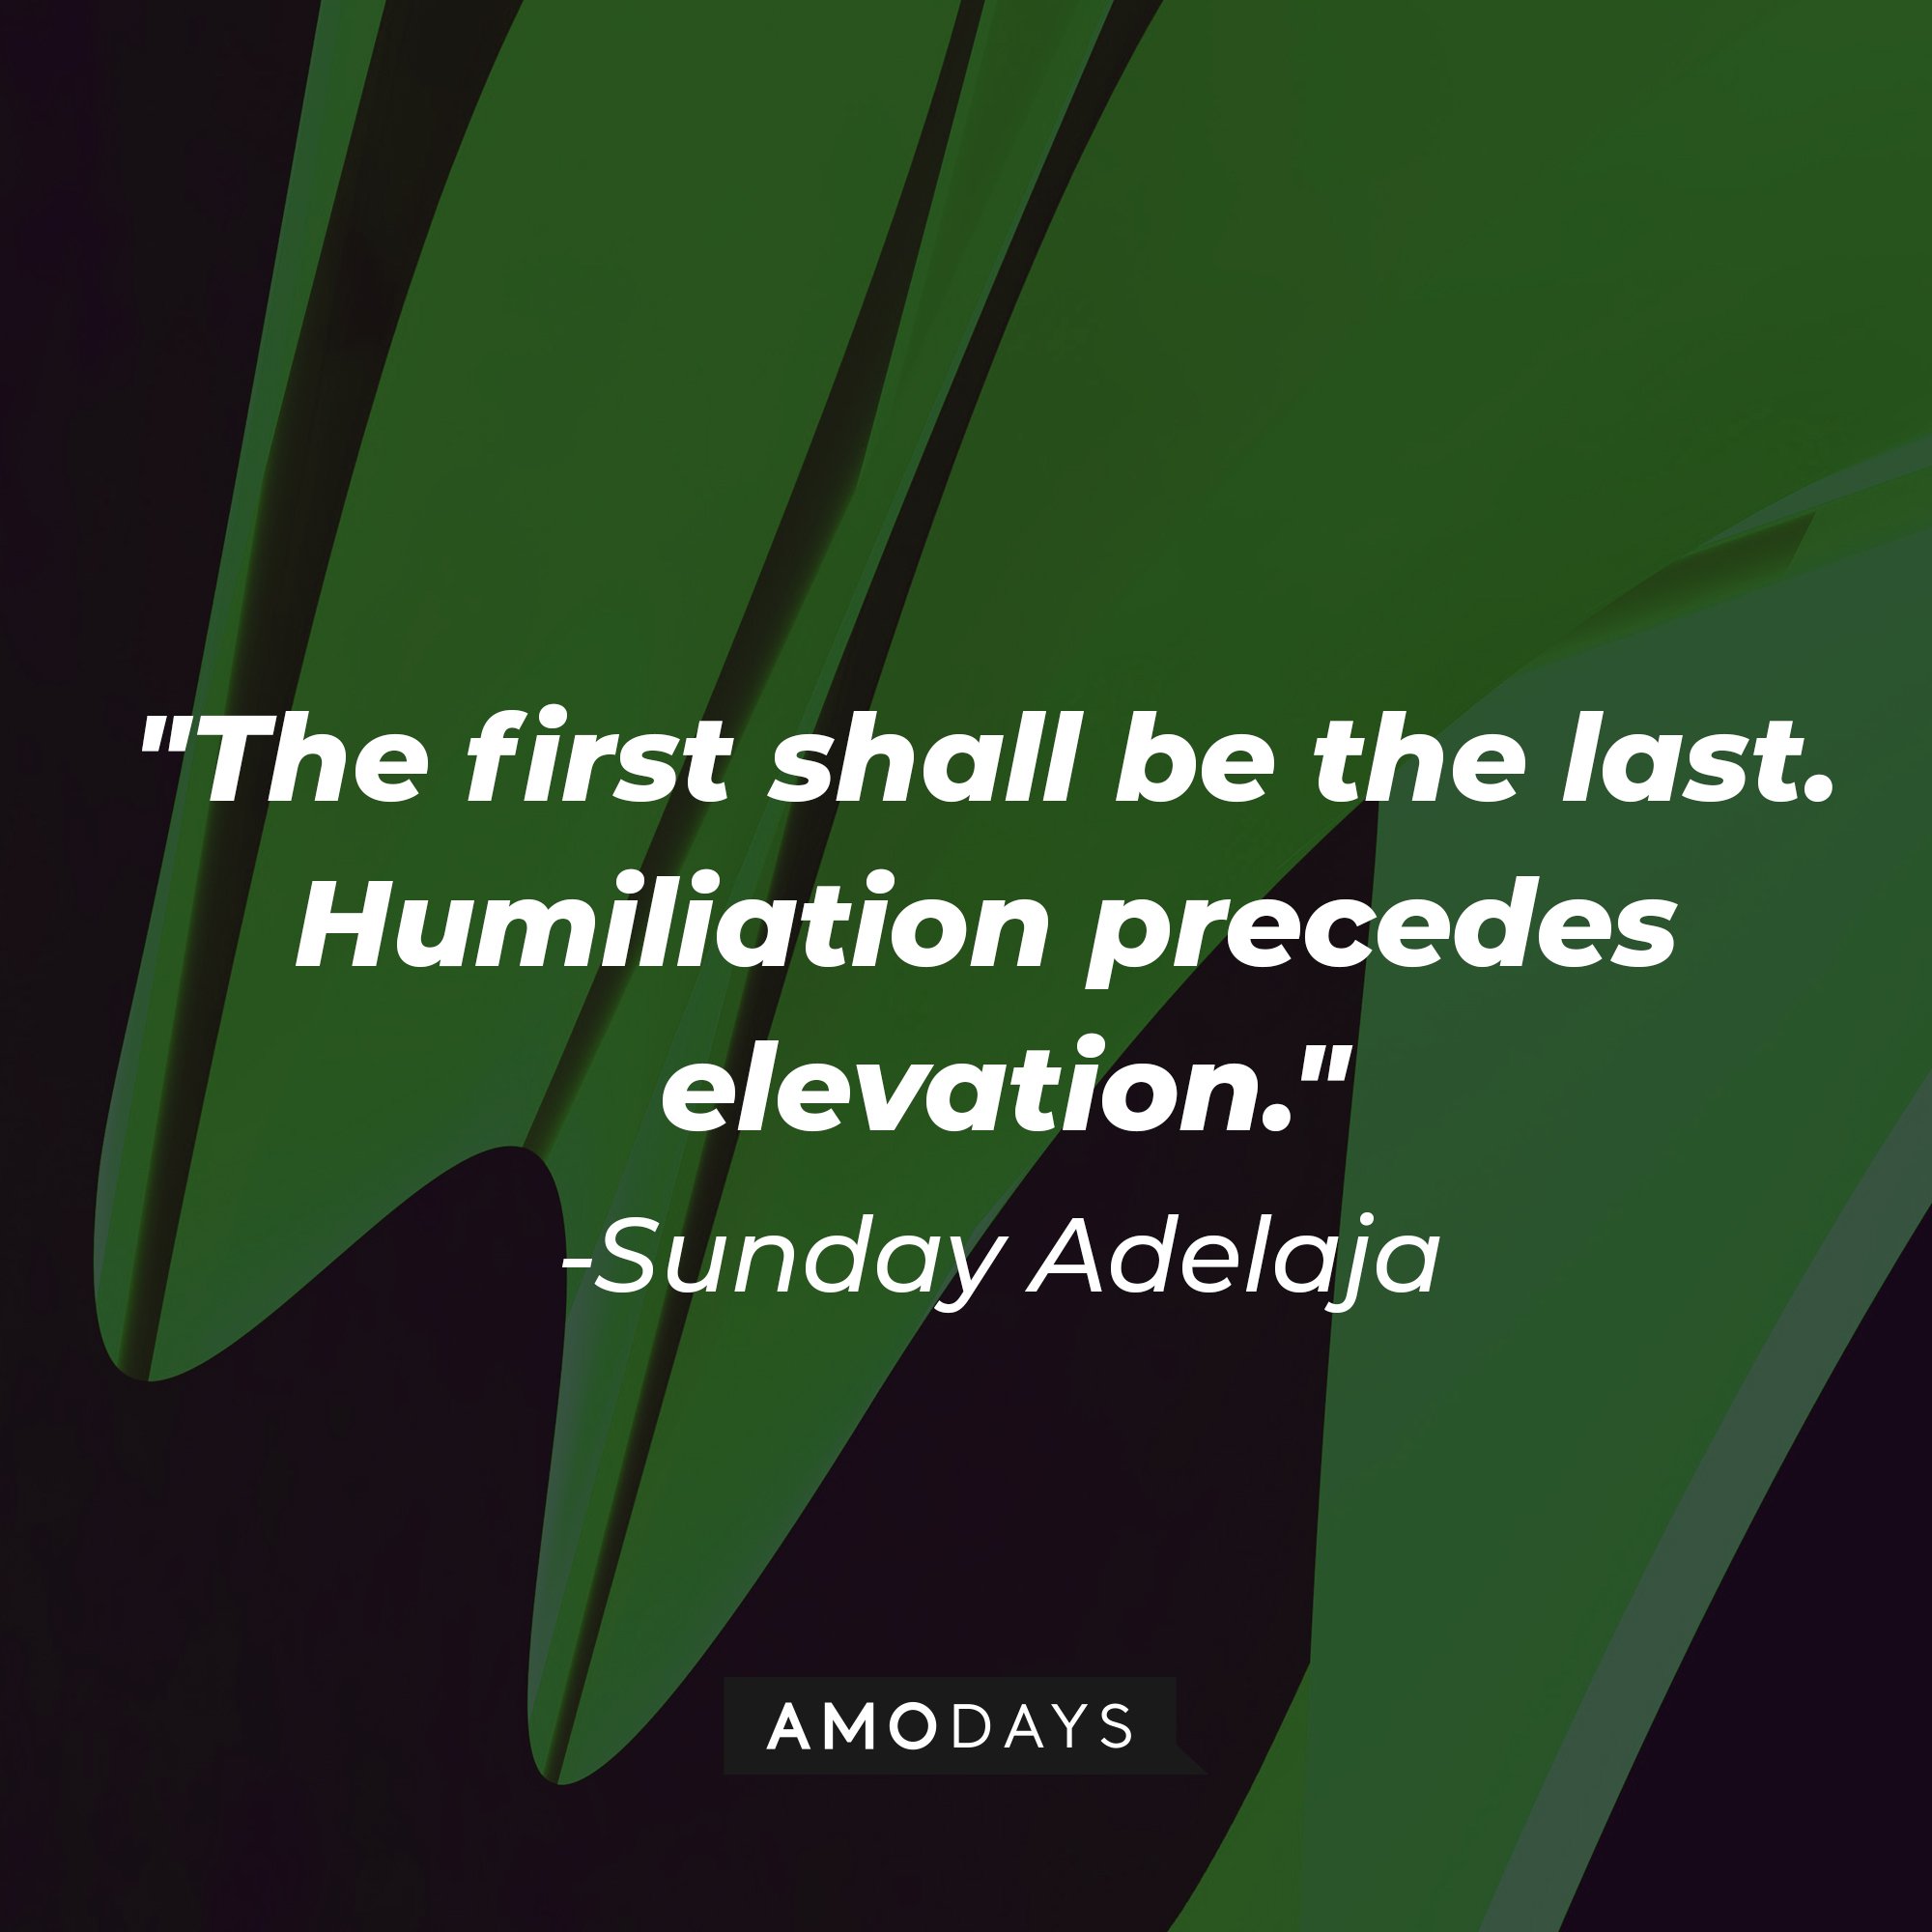 Sunday Adelaja’s quote: "The first shall be the last. Humiliation precedes elevation." | Image: AmoDays